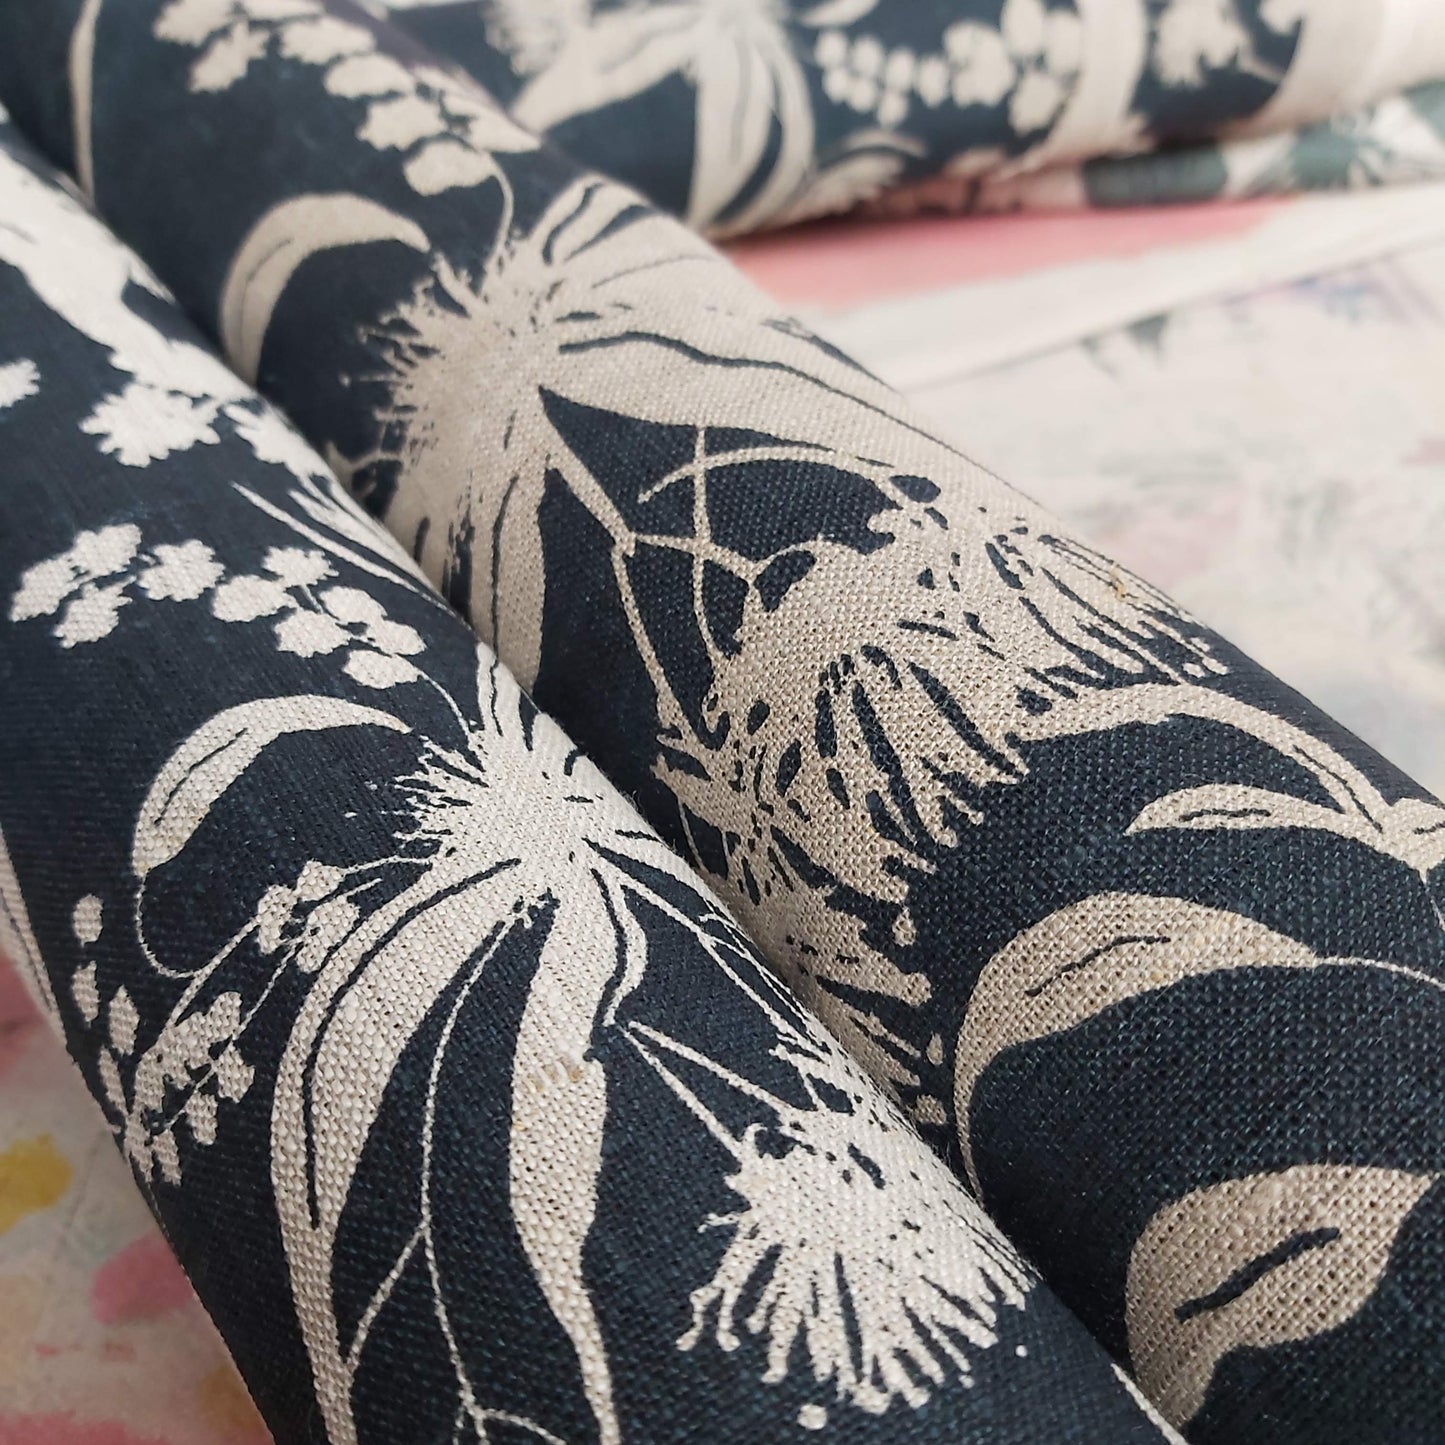 Forager's Delight in indigo on oatmeal or flax linen. Hand screenprinted by Femke Textiles